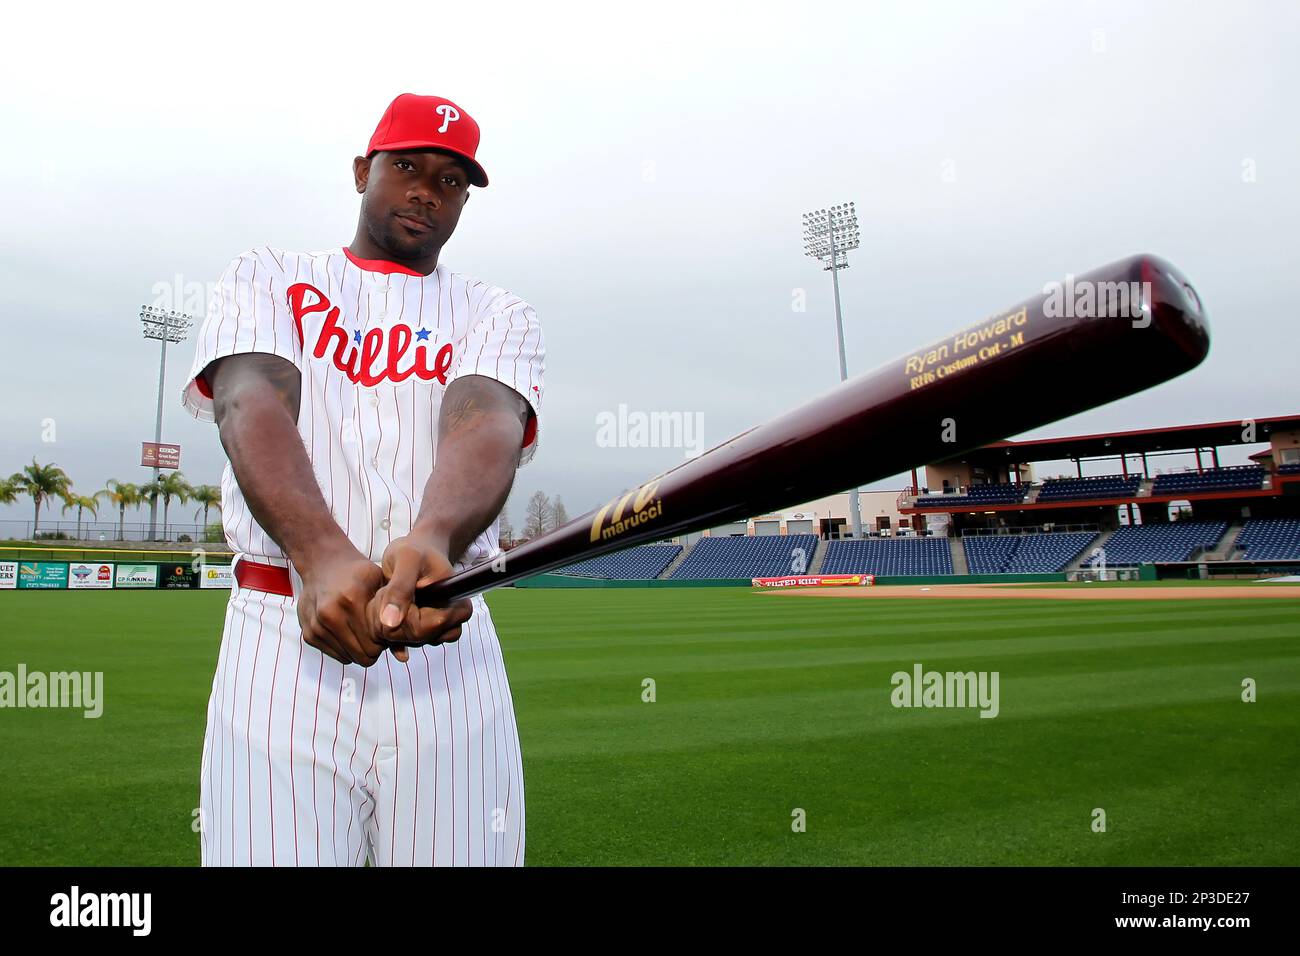 19 Feb 2015: Ryan Howard during the Phillies Photo Day workout at